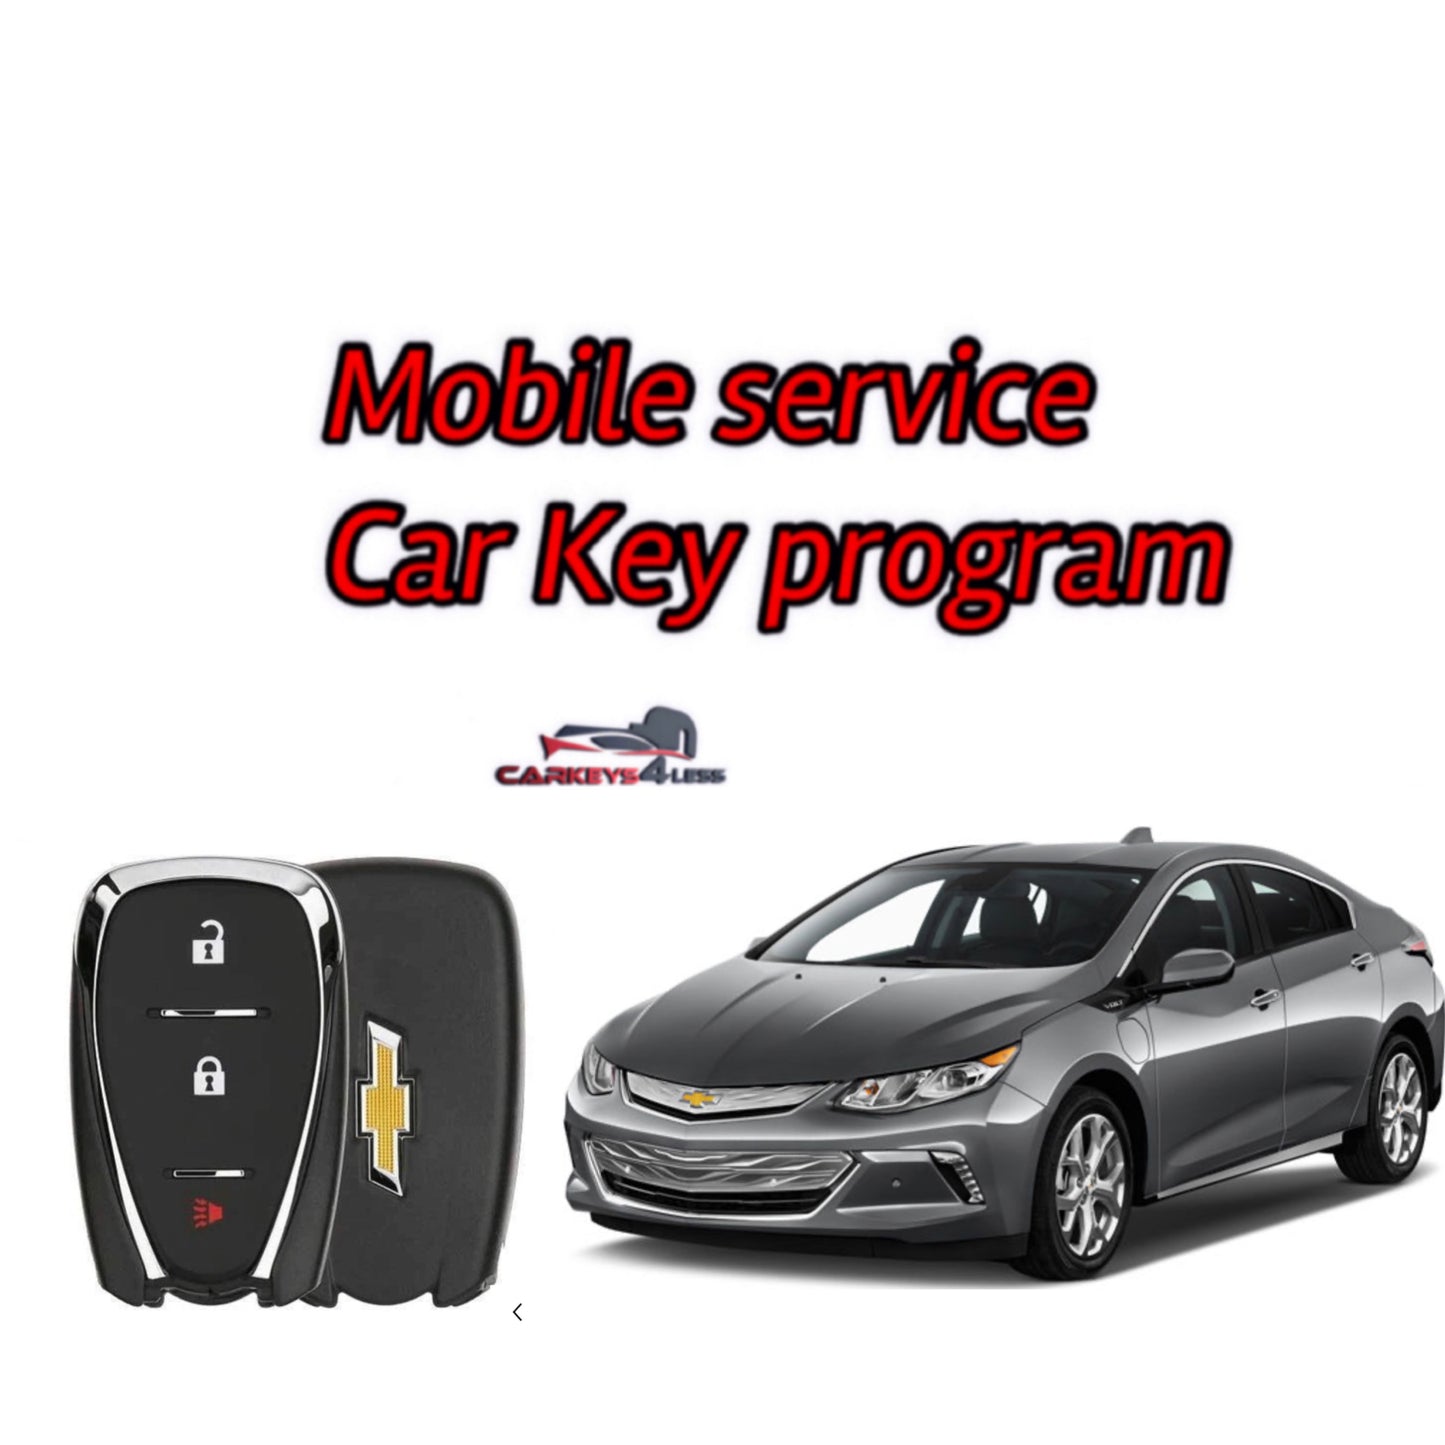 Mobile service for an oem refurbished Chevrolet car key replacement